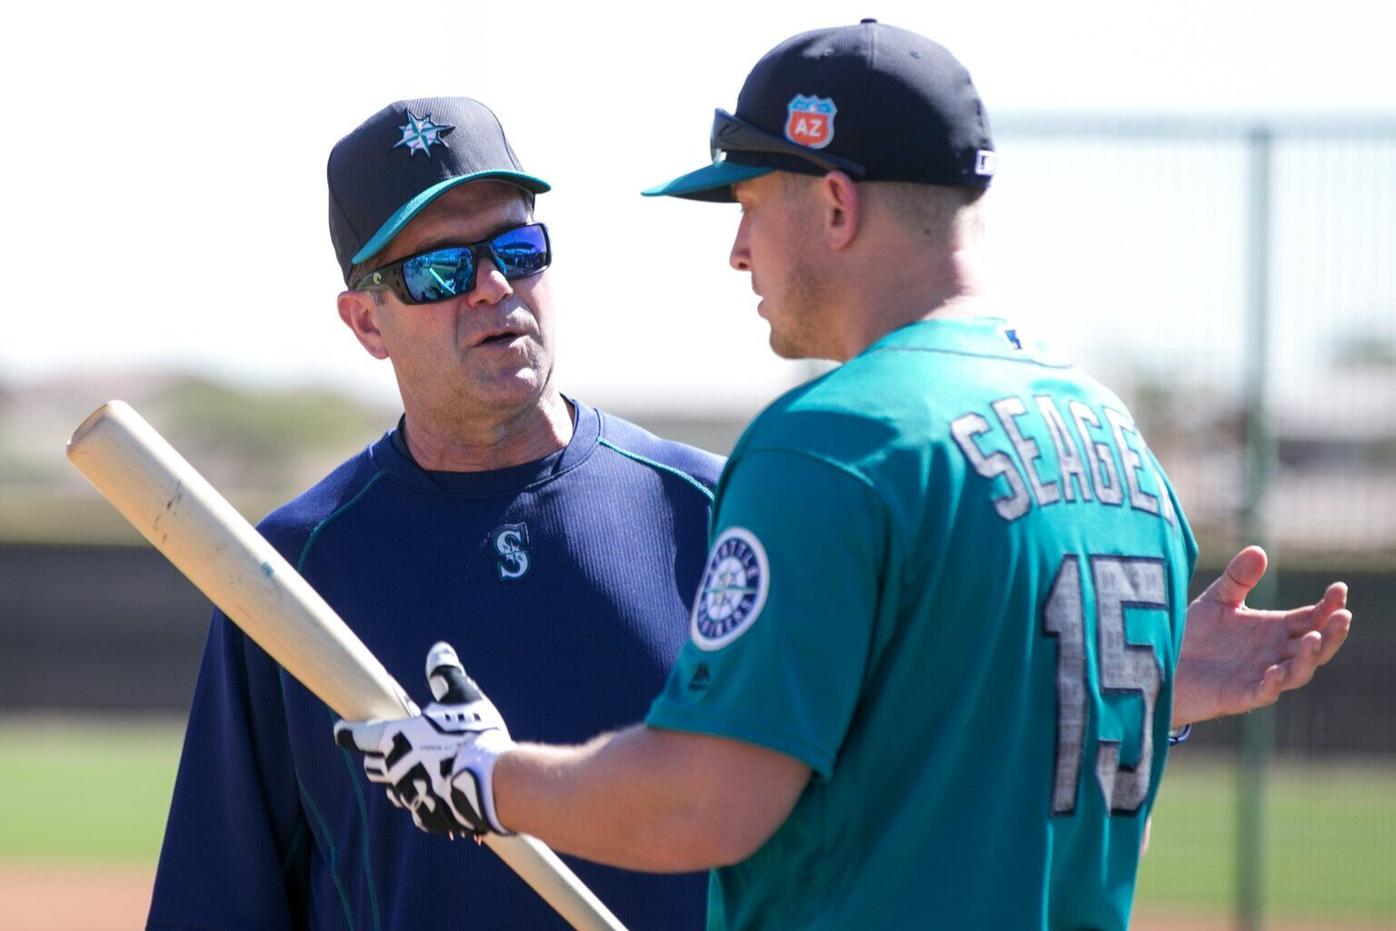 Edgar Martinez Honored by Seattle Mariners